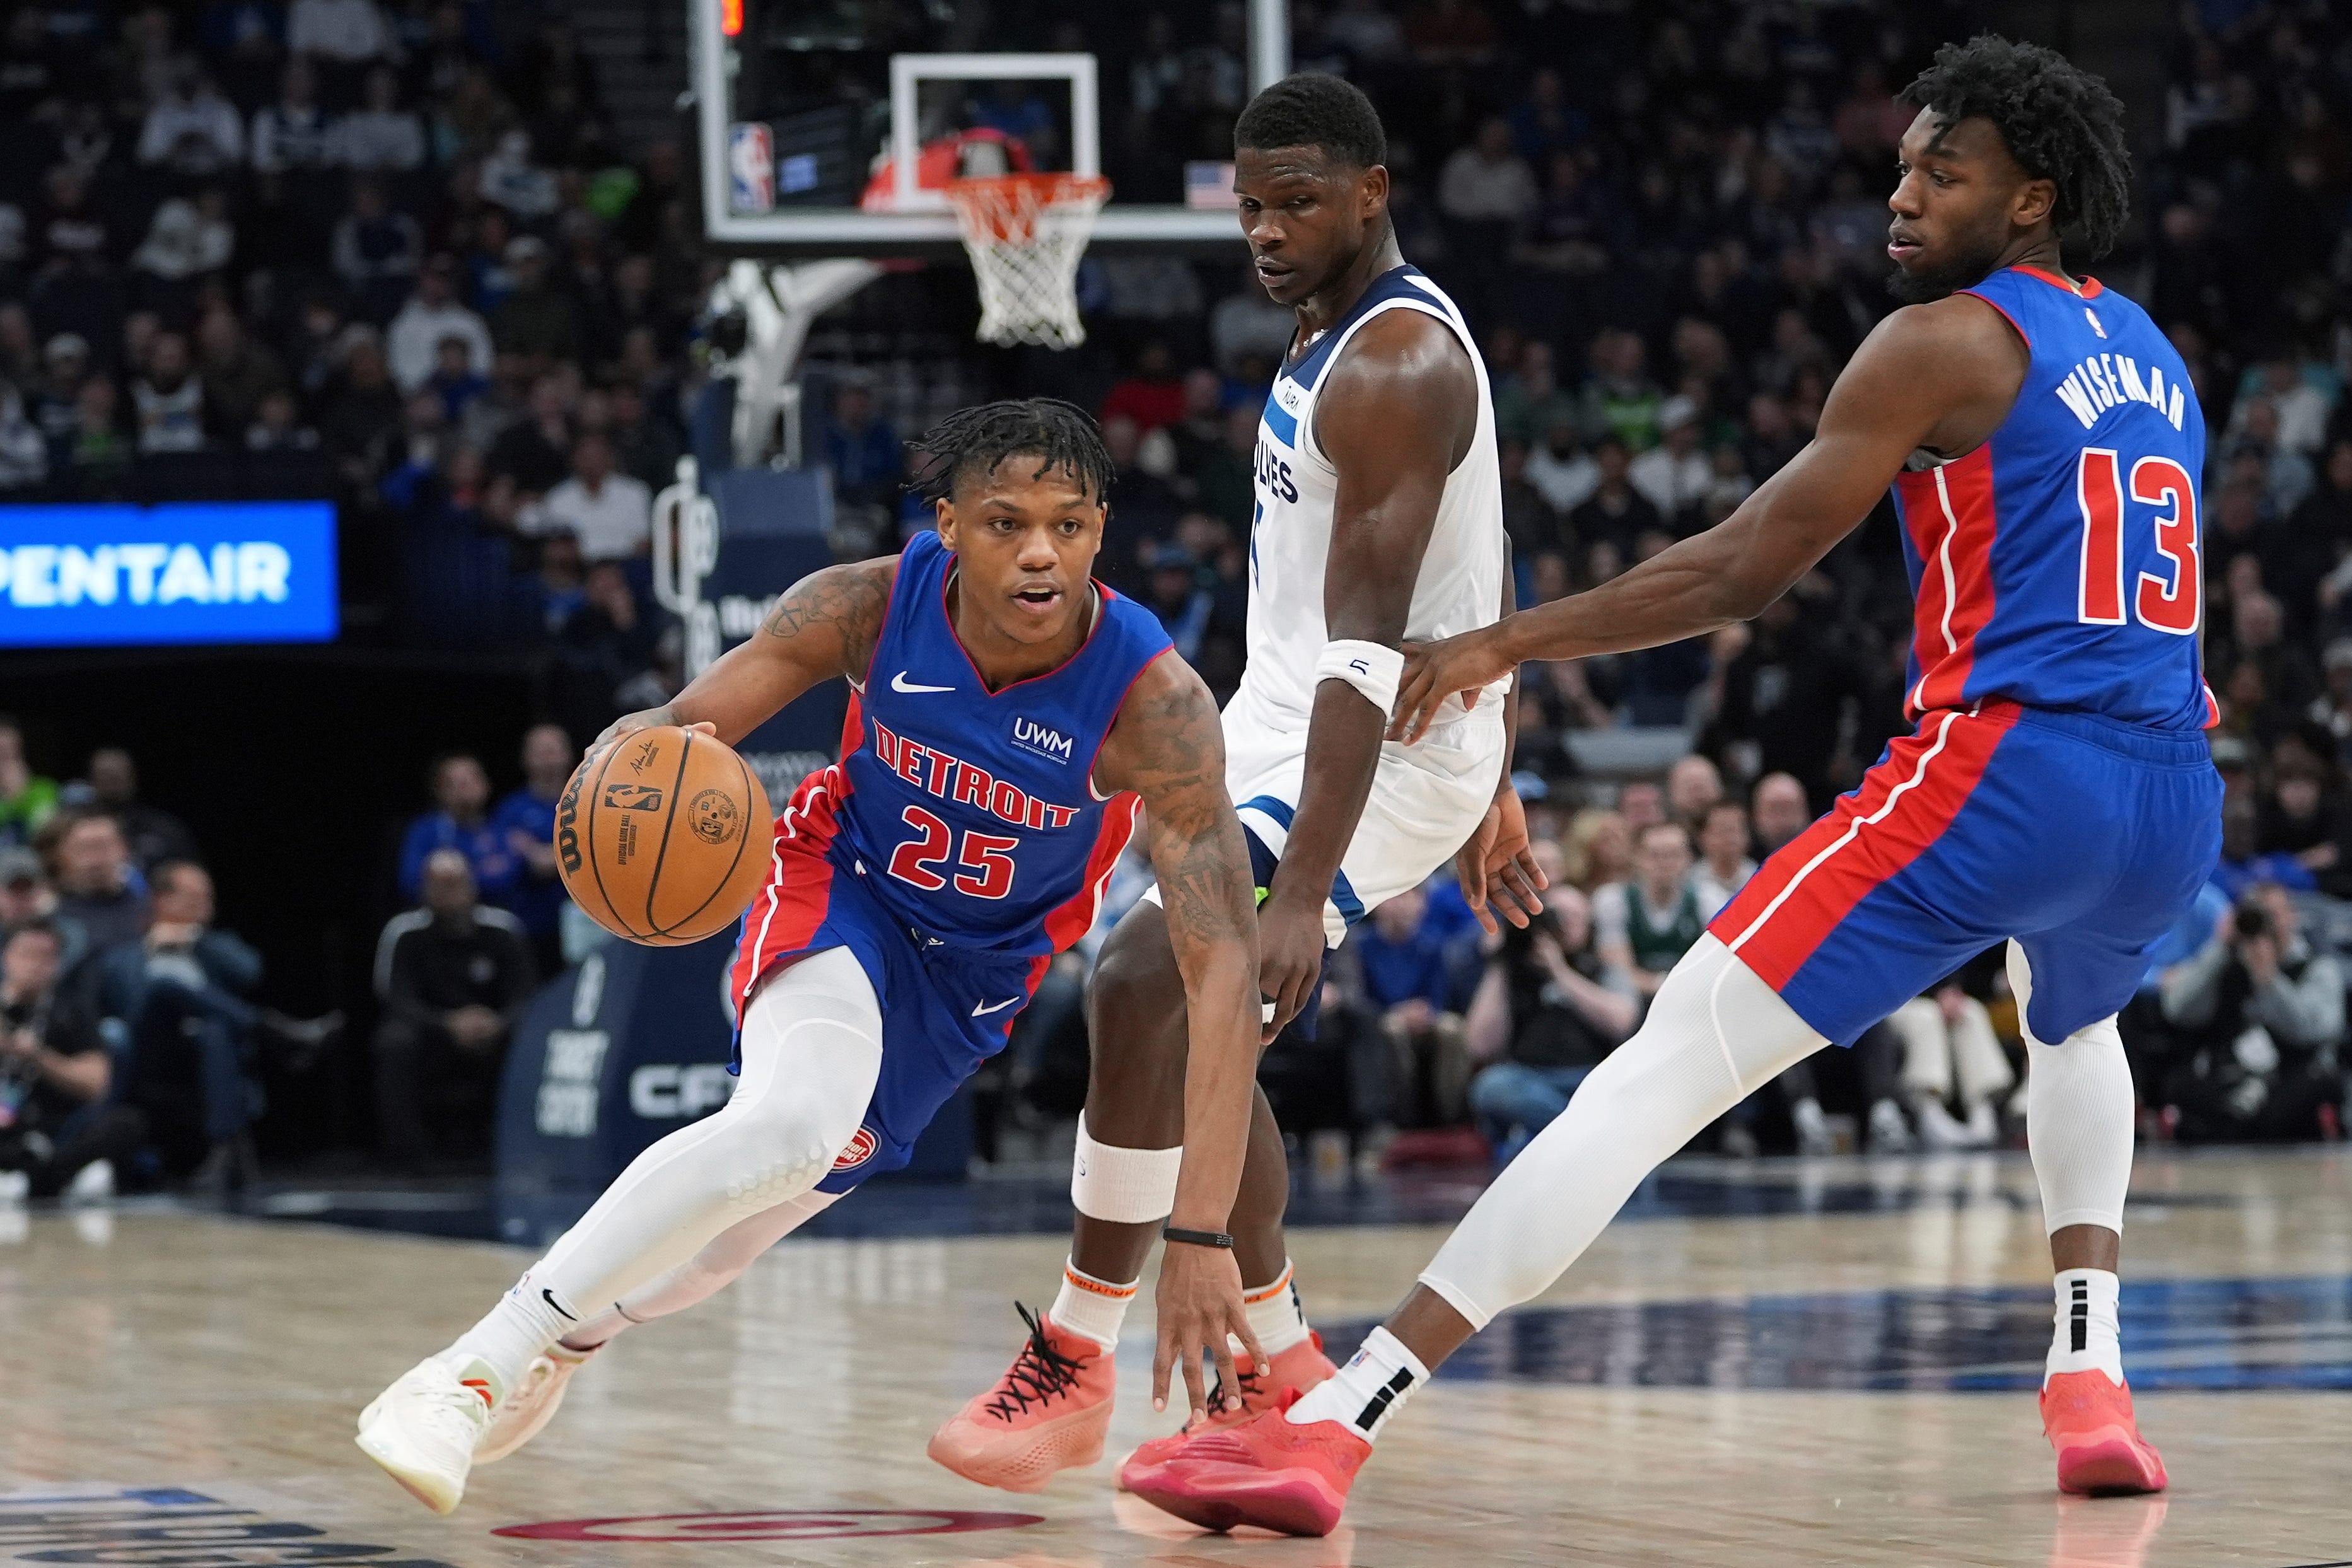 Detroit Pistons guard Marcus Sasser (25) works toward the basket as Minnesota Timberwolves guard Anthony Edwards, center, defends during the first half.